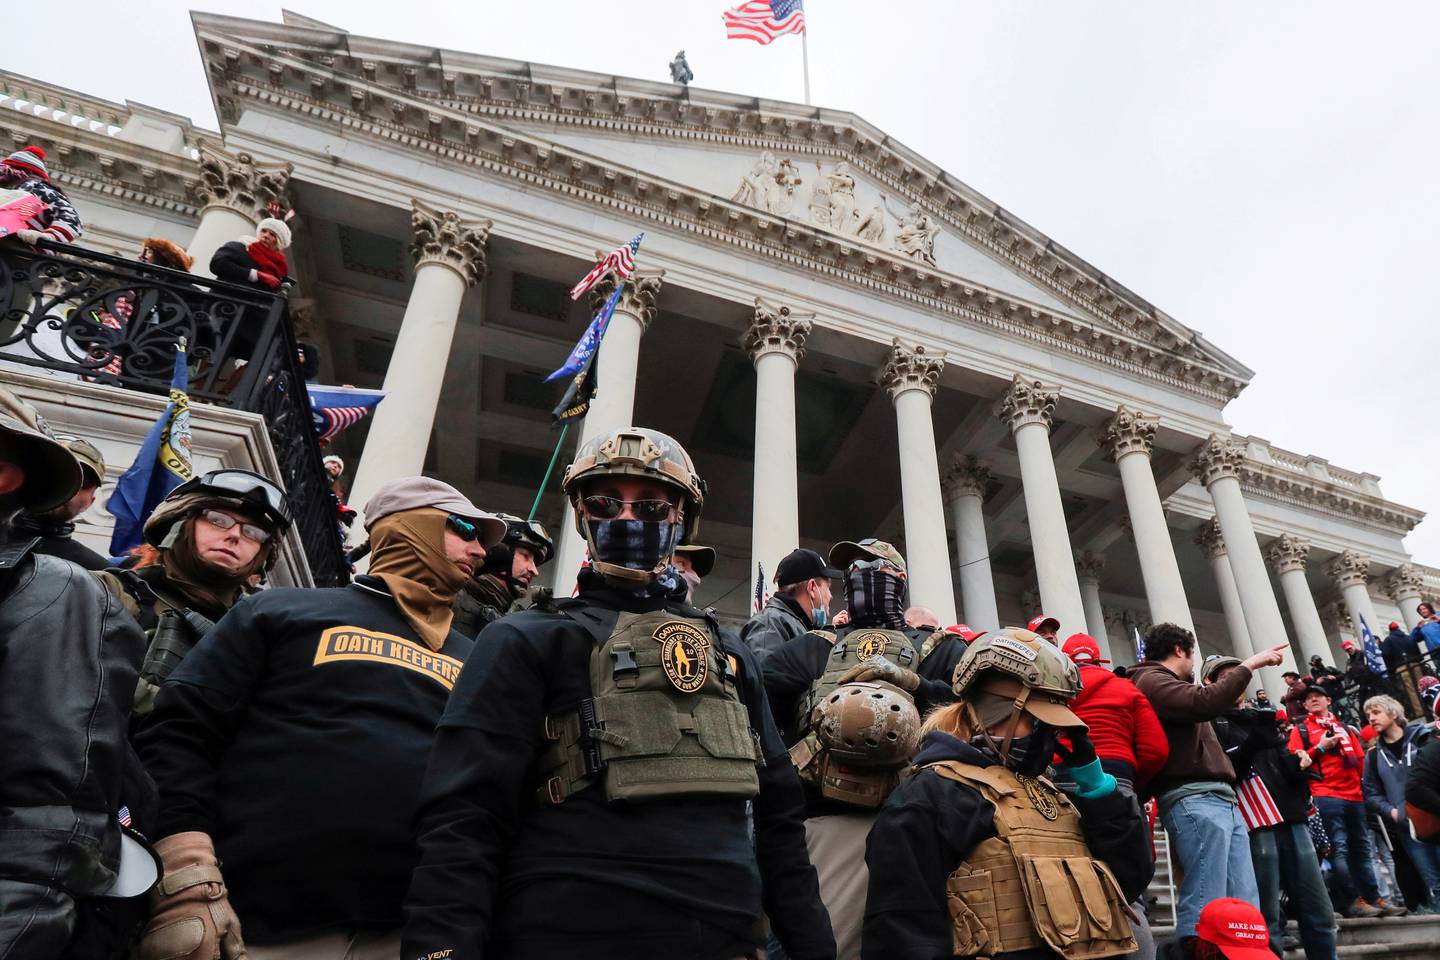 Members of the Oath Keepers militia group stand among supporters of Donald Trump on the steps of the US Capitol in Washington, January 6. Reuters